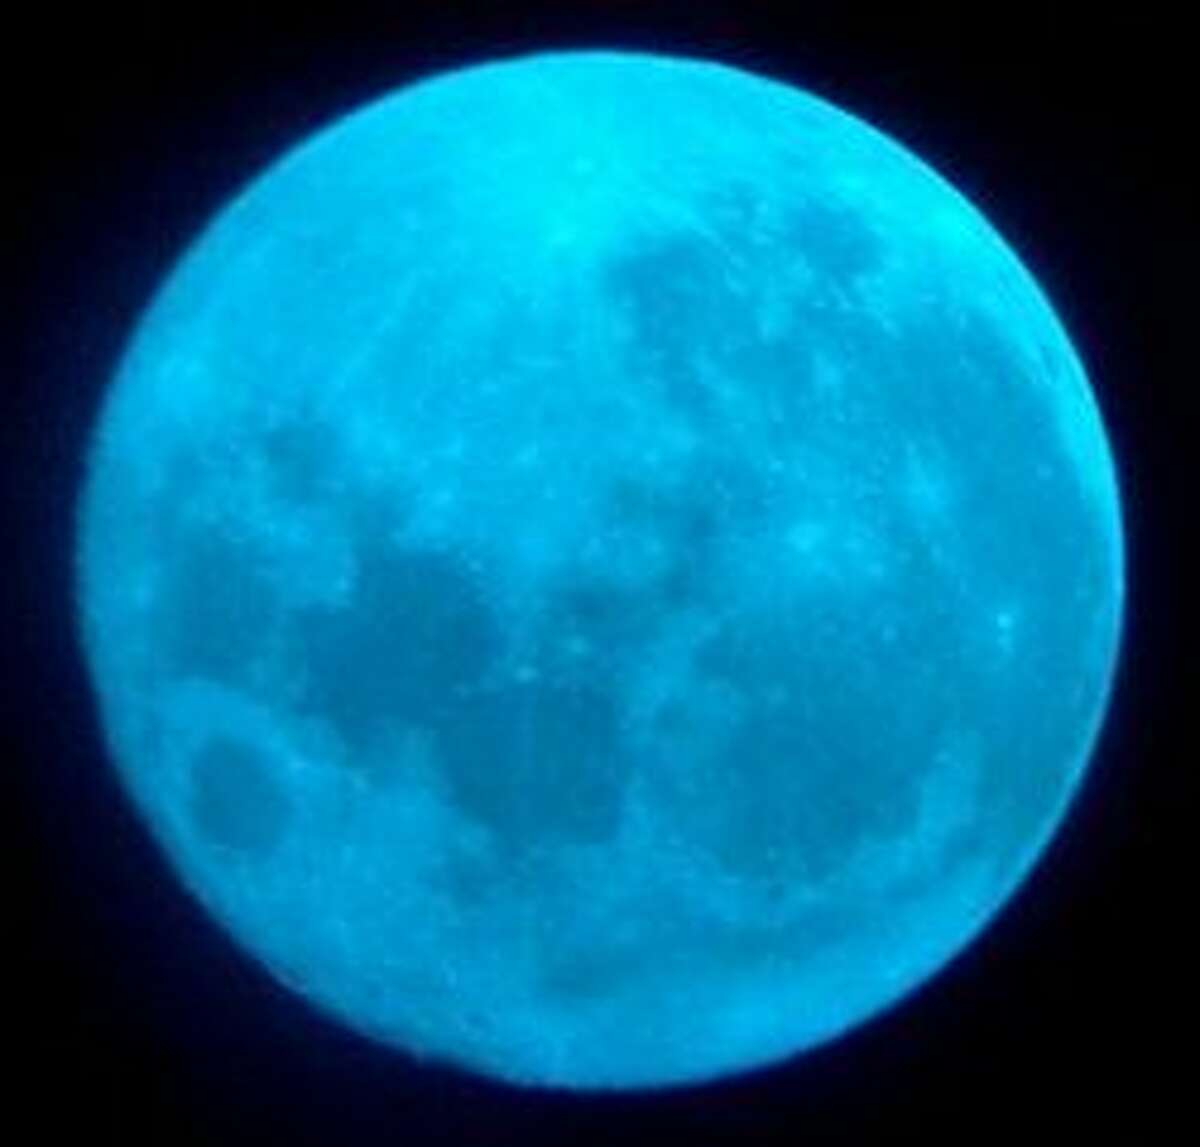 Blue moon to glow in Halloween sky When: Oct. 31 Young masqueraders heading out to collect candy in their neighborhoods on Halloween will do so under the light of a blue moon that will rise on the final night of the month. Blue moons are uncommon, rising once every two or three years, but a blue moon on Halloween is very rare. After the blue moon on Oct. 31, 2020, trick-or-treaters will need to wait until 2039 to see the next blue moon on Halloween.